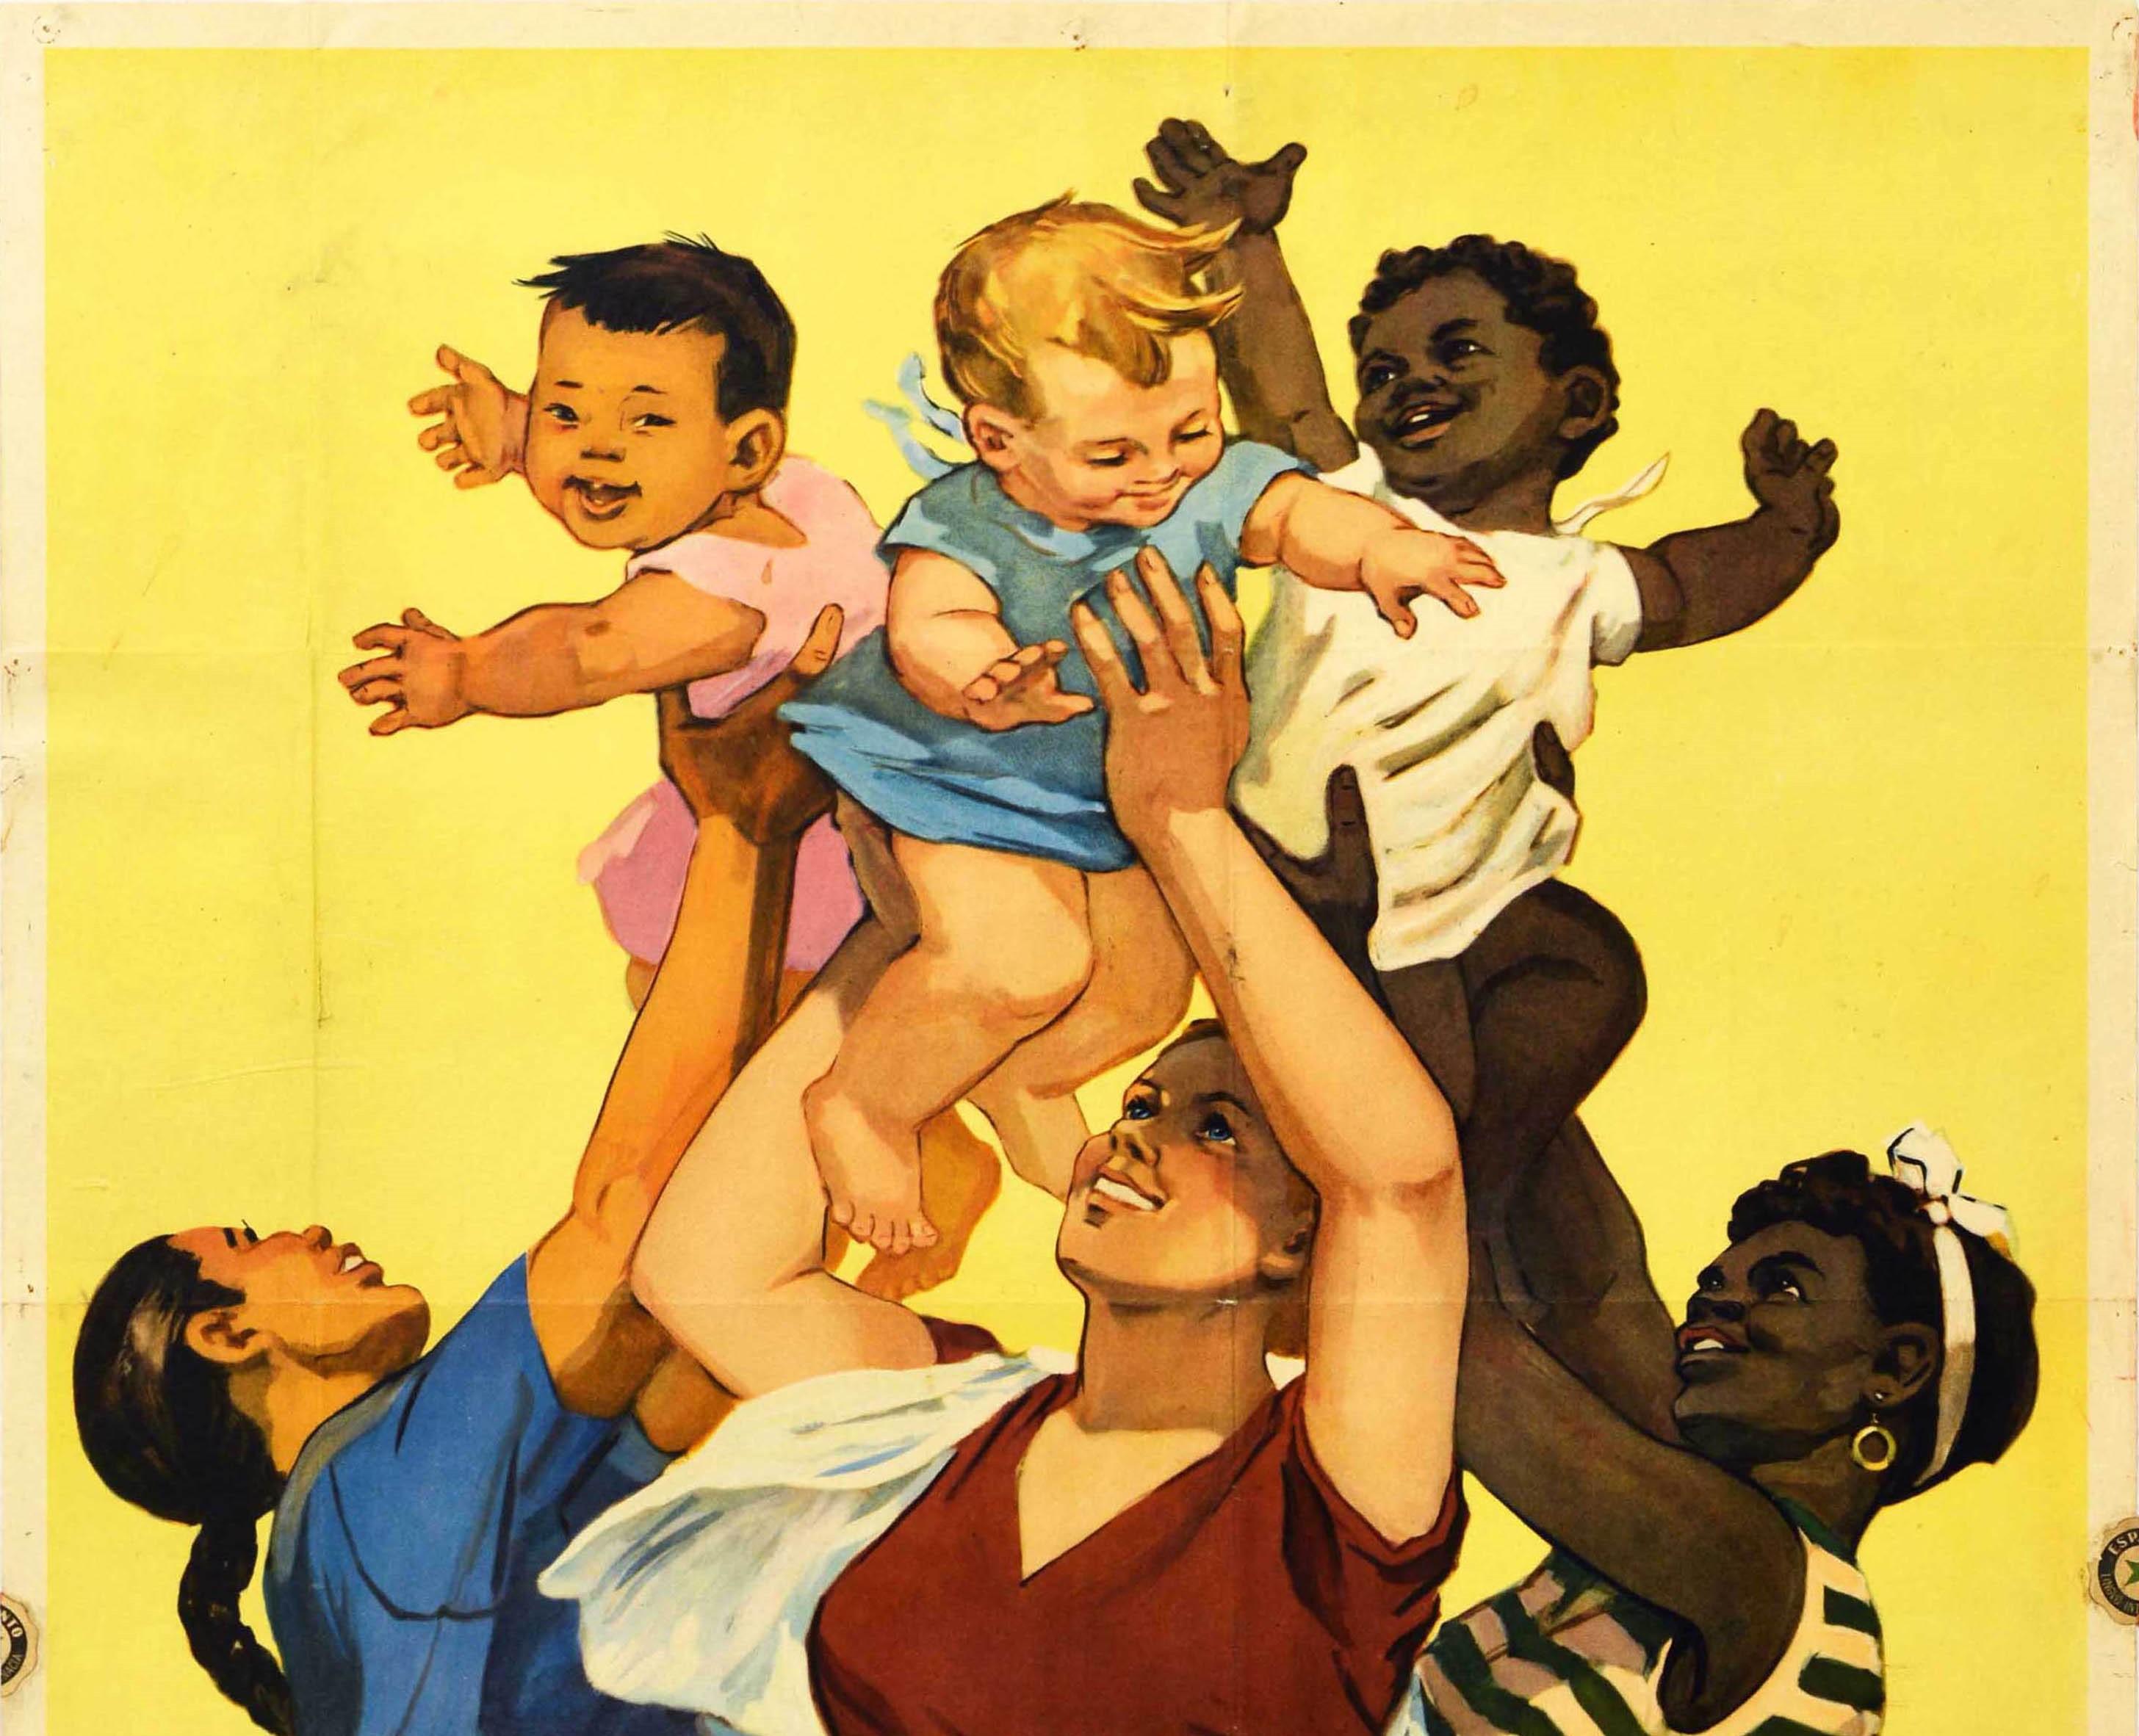 Original vintage anti-war international peace propaganda poster featuring three smiling mothers holding up their happy children against a yellow background with the bold text in Russian and German on their flowing skirts below and in Esperanto on